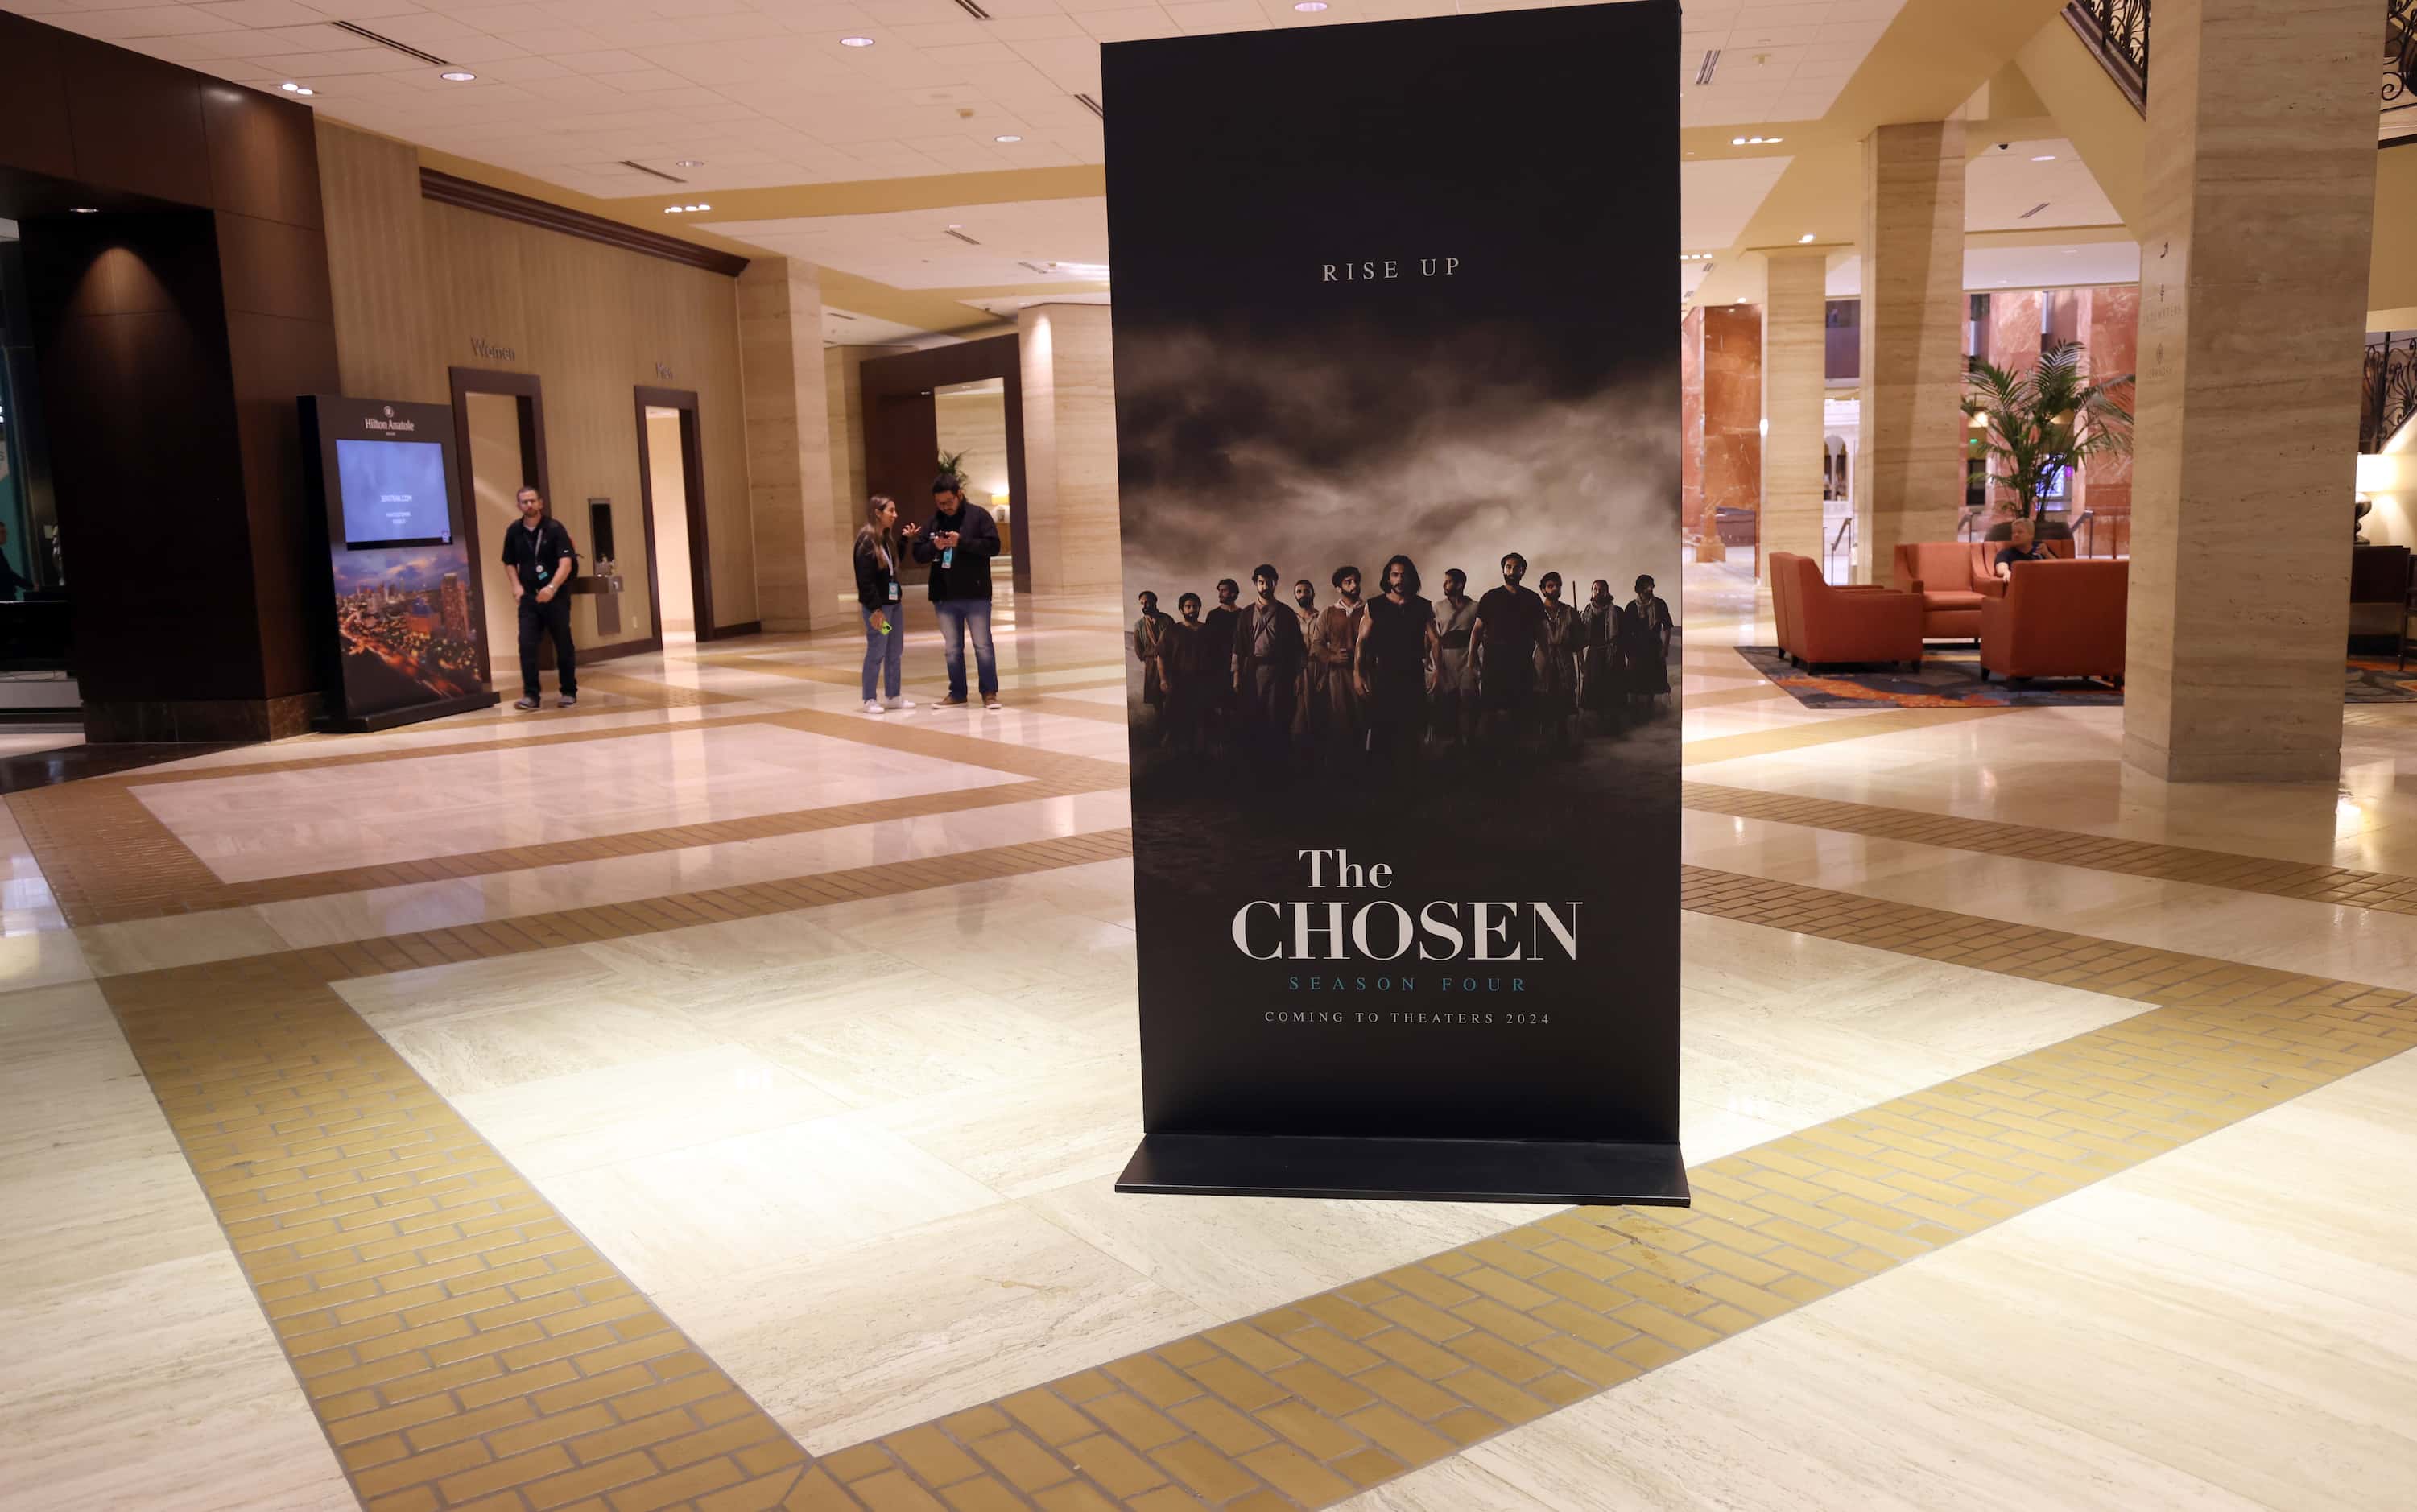 A reminder of the upcoming Season Four of "The Chosen" greets visitors in the foyer of the...